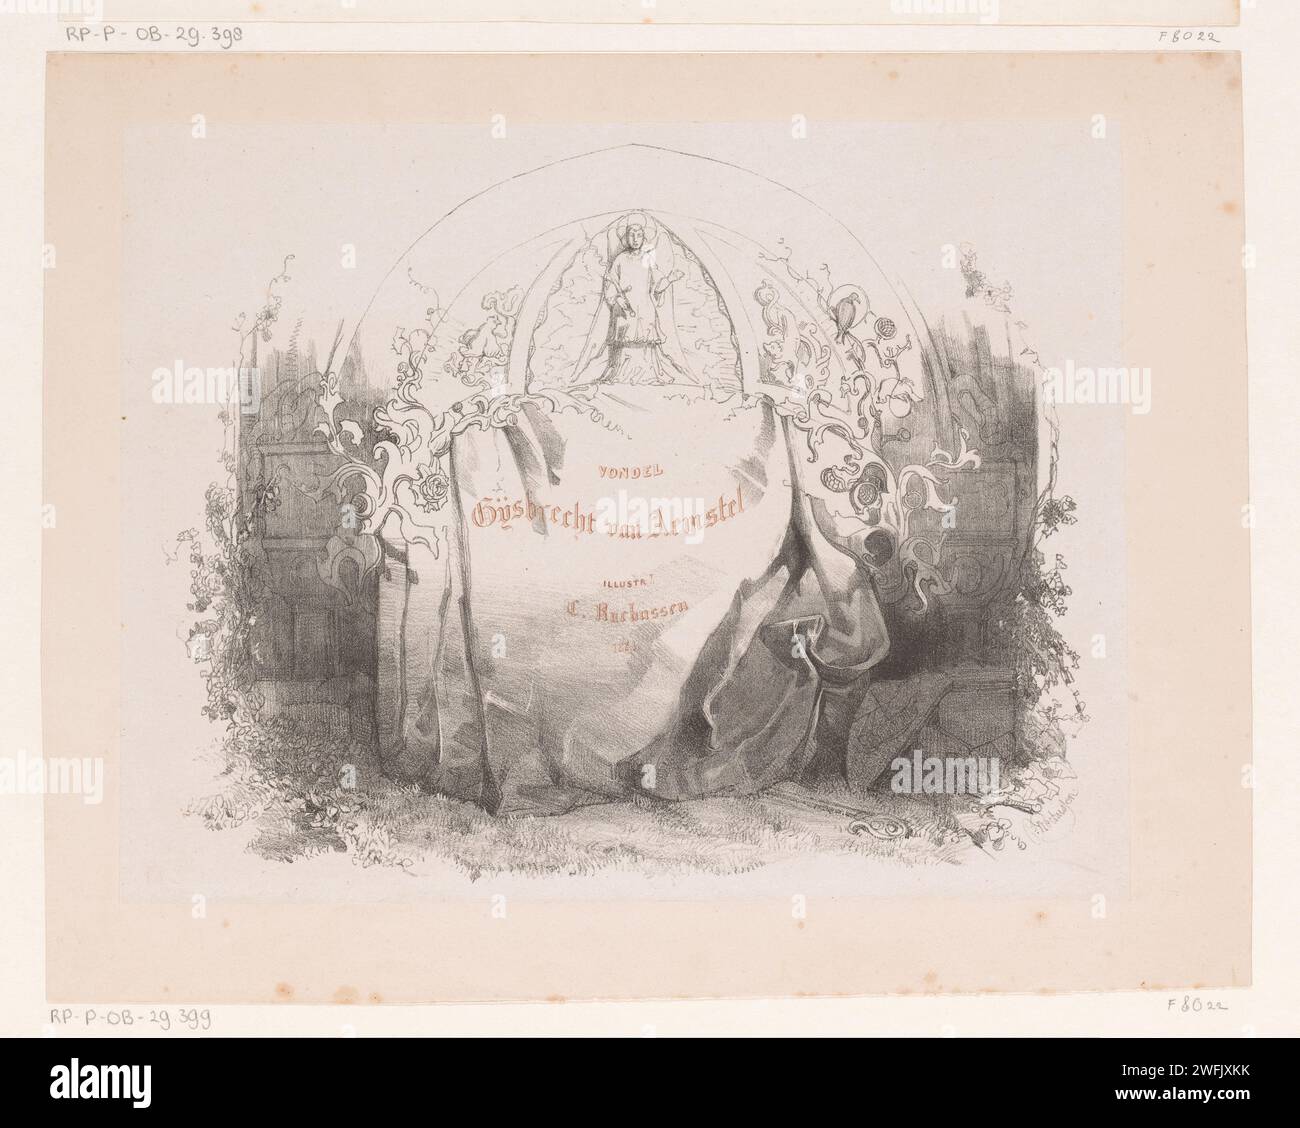 Cloth with title against Gothic background, Charles Rochussen, 1841 print  The Hague paper.  hangings and drapery Stock Photo